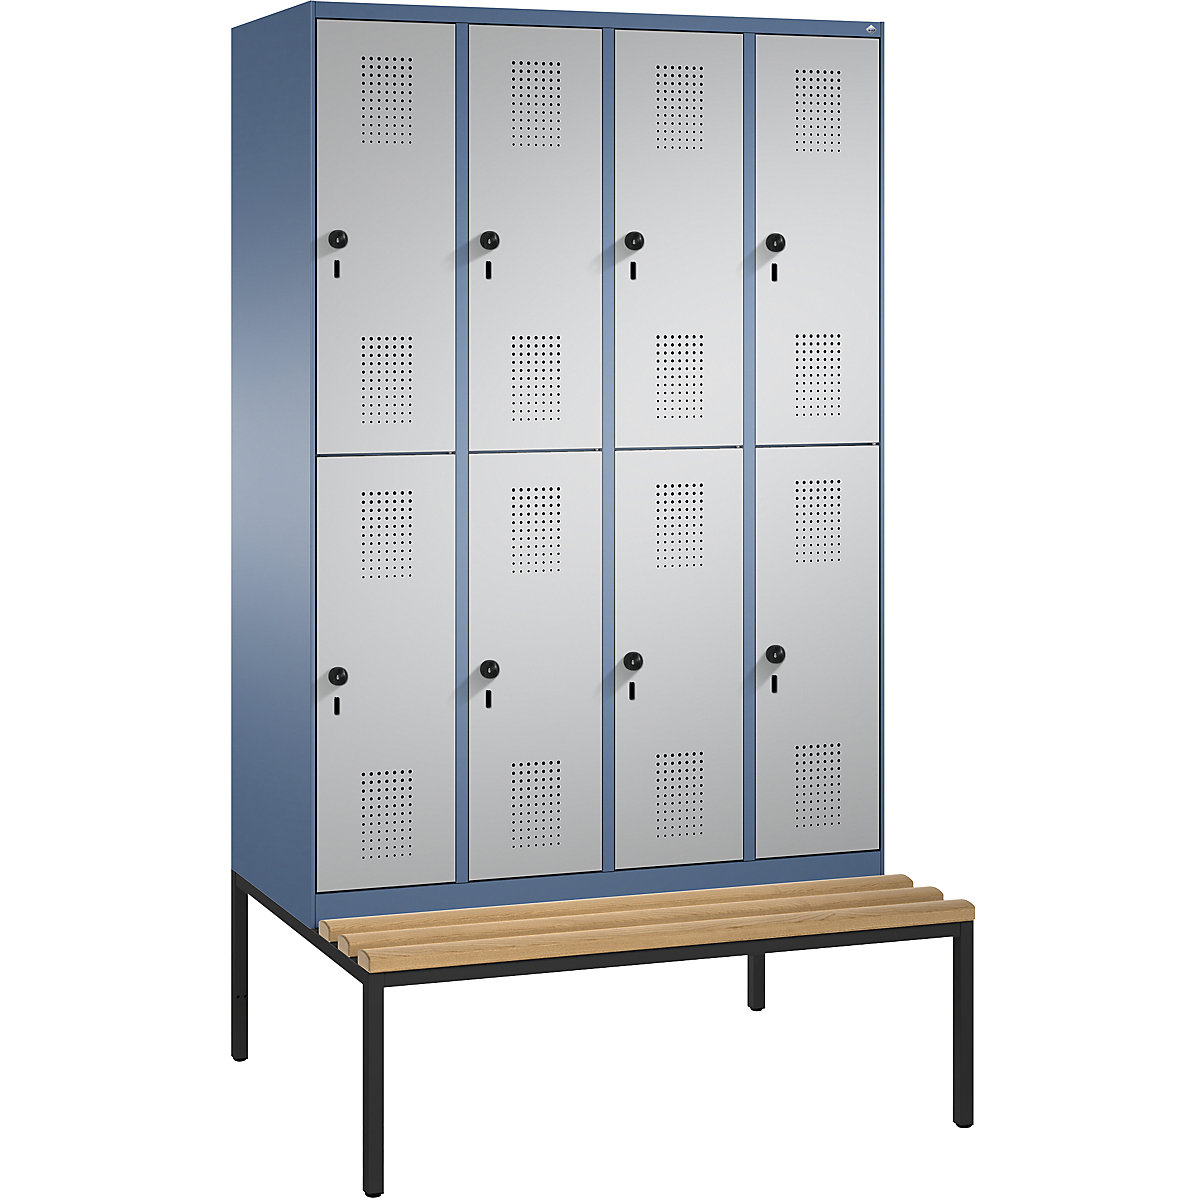 EVOLO cloakroom locker, double tier, with bench - C+P